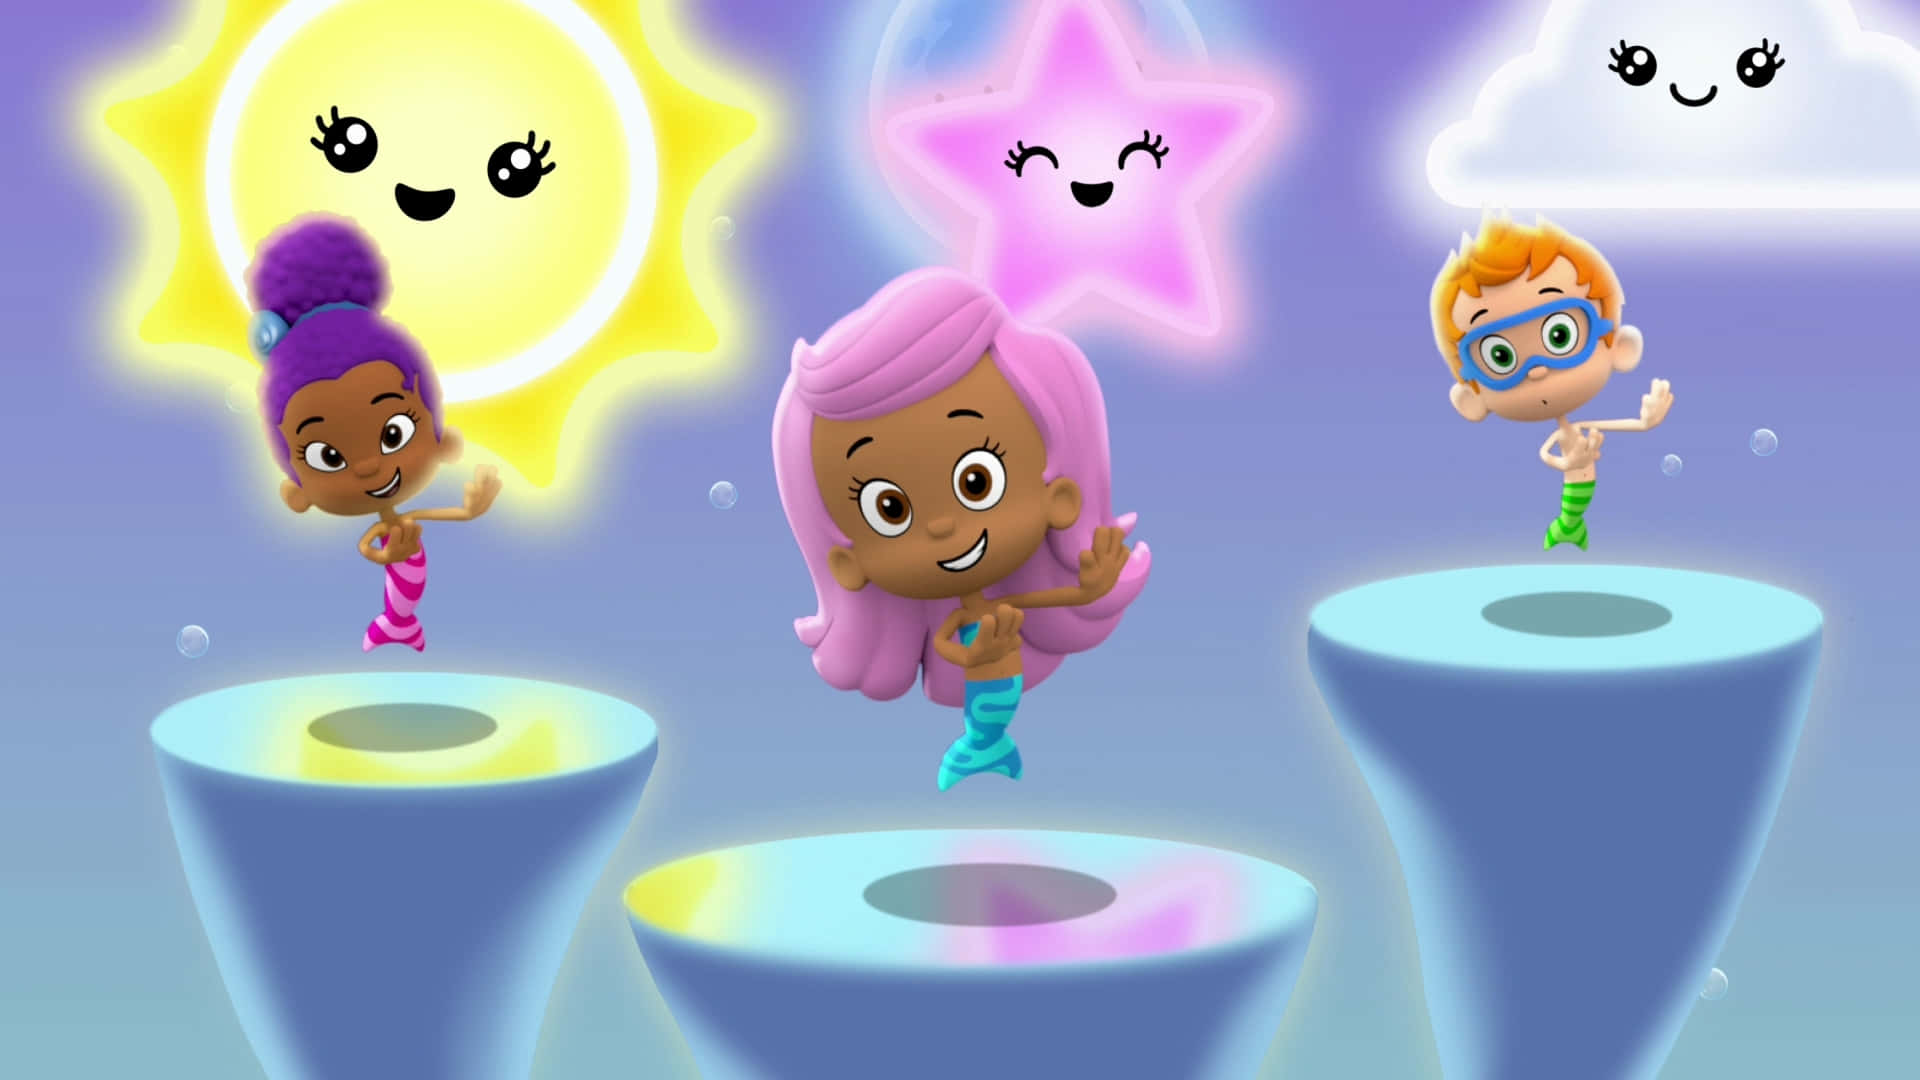 "The Bubble Guppies explore the amazing world of science"